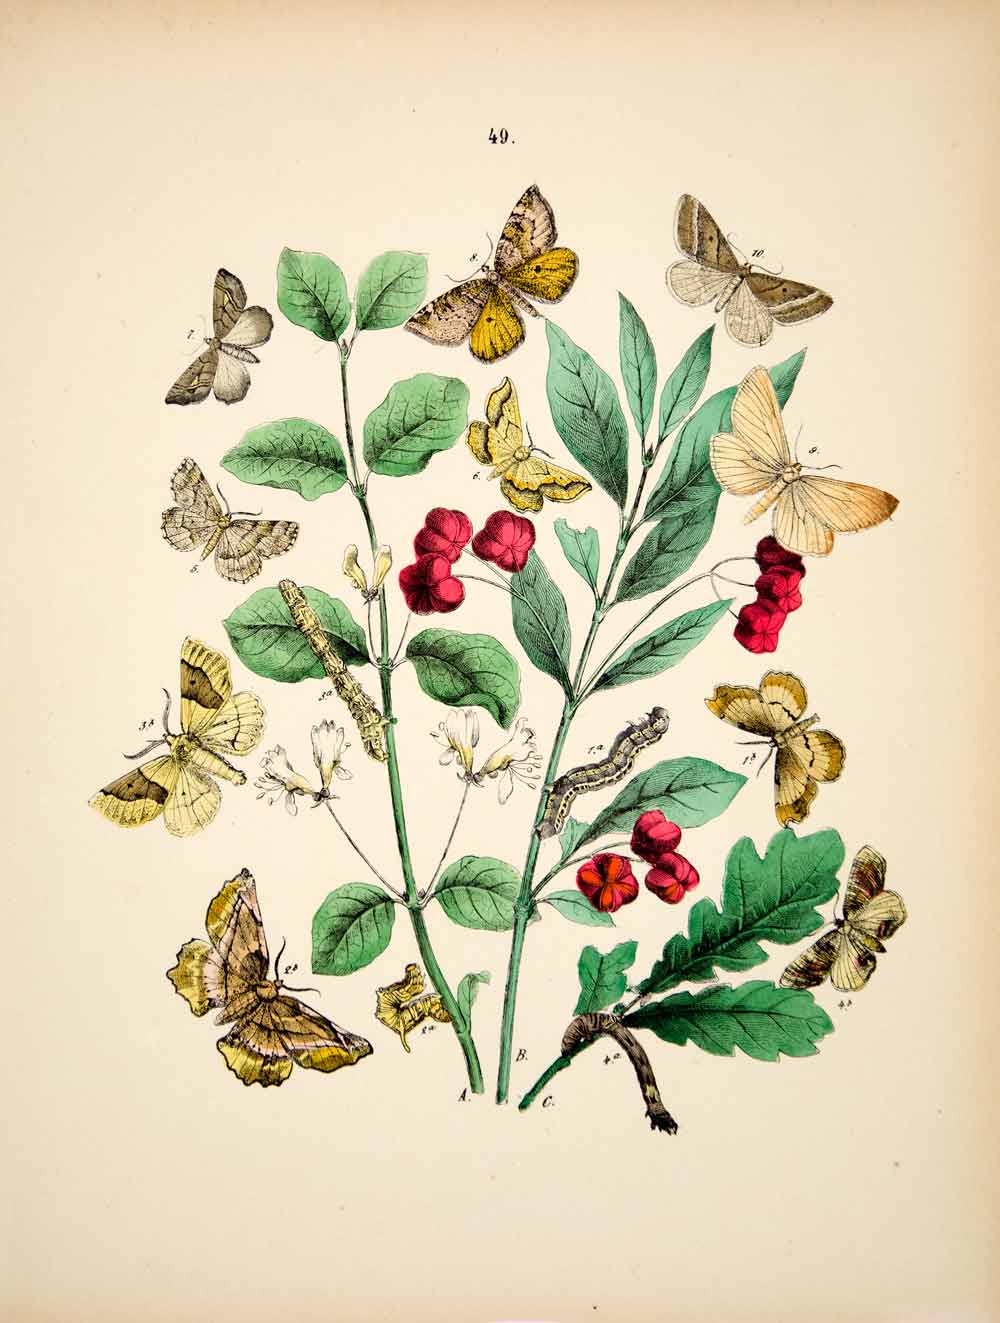 1882 Hand-Colored Lithograph WF Kirby Art Scalloped Oak Moth Insect Bugs EBM1